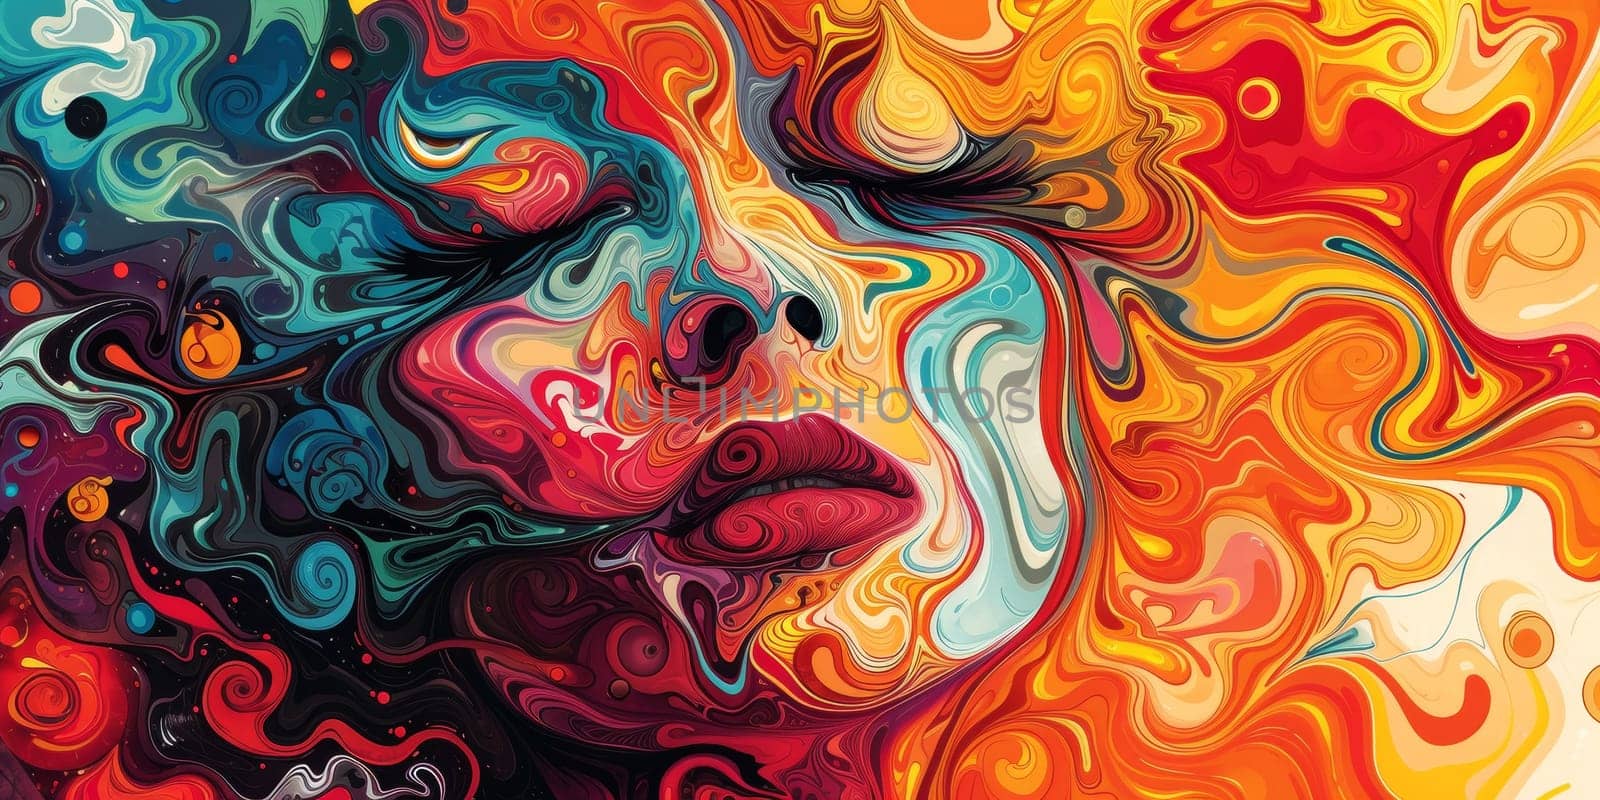 A colorful painting of a woman's face with swirls and colors